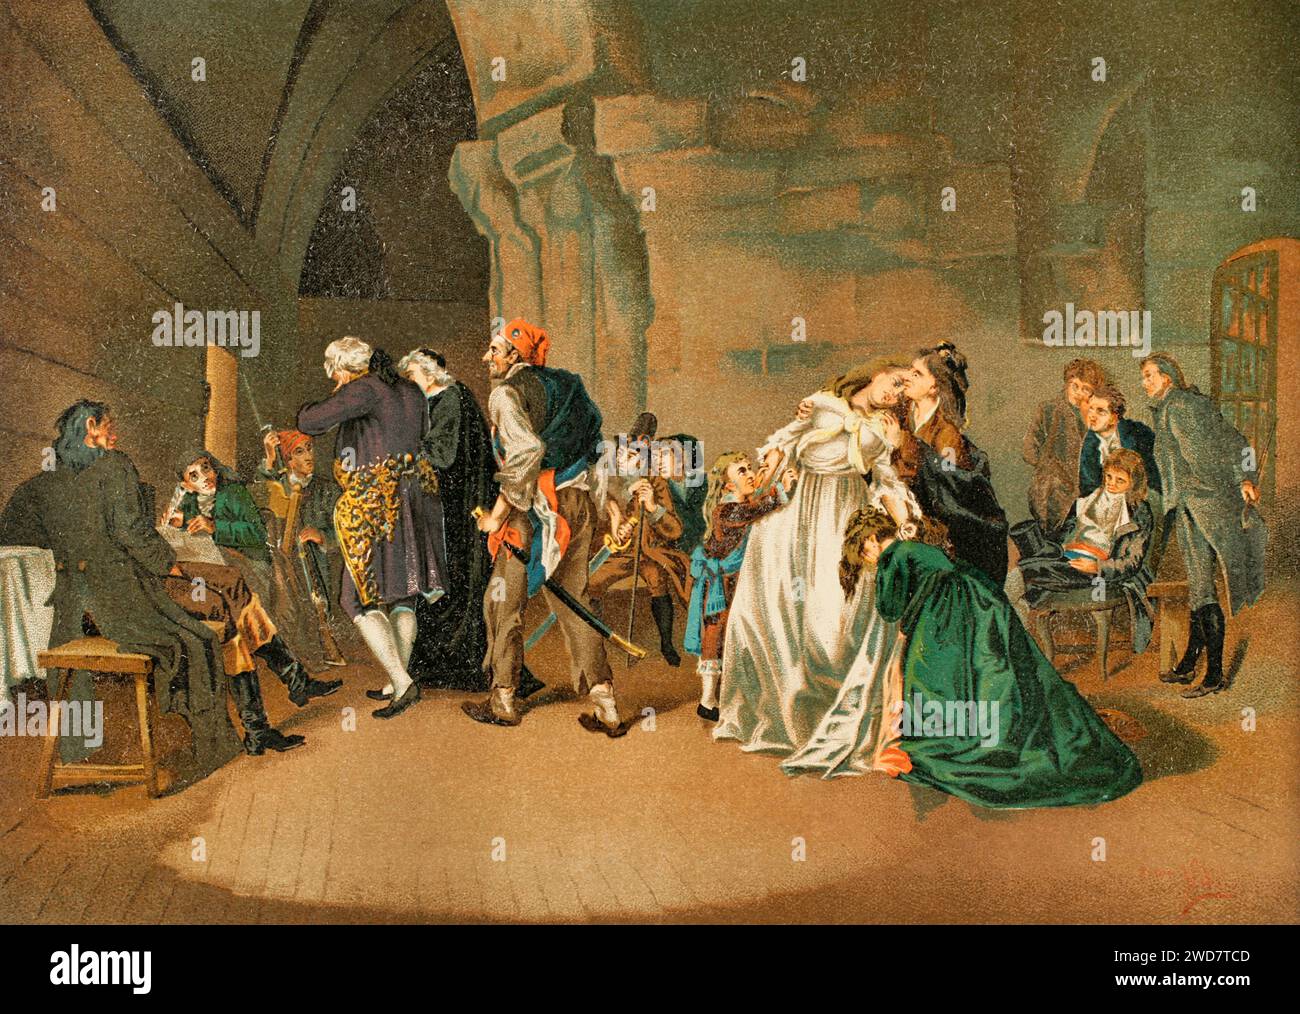 French Revolution. The parting of King Louis XVI and Marie Antoinette, 1792. Both were tried and executed in 1793, during the Reign of Terror. Chromolithography. 'Historia Universal', by César Cantú. Volume X, 1881. Stock Photo